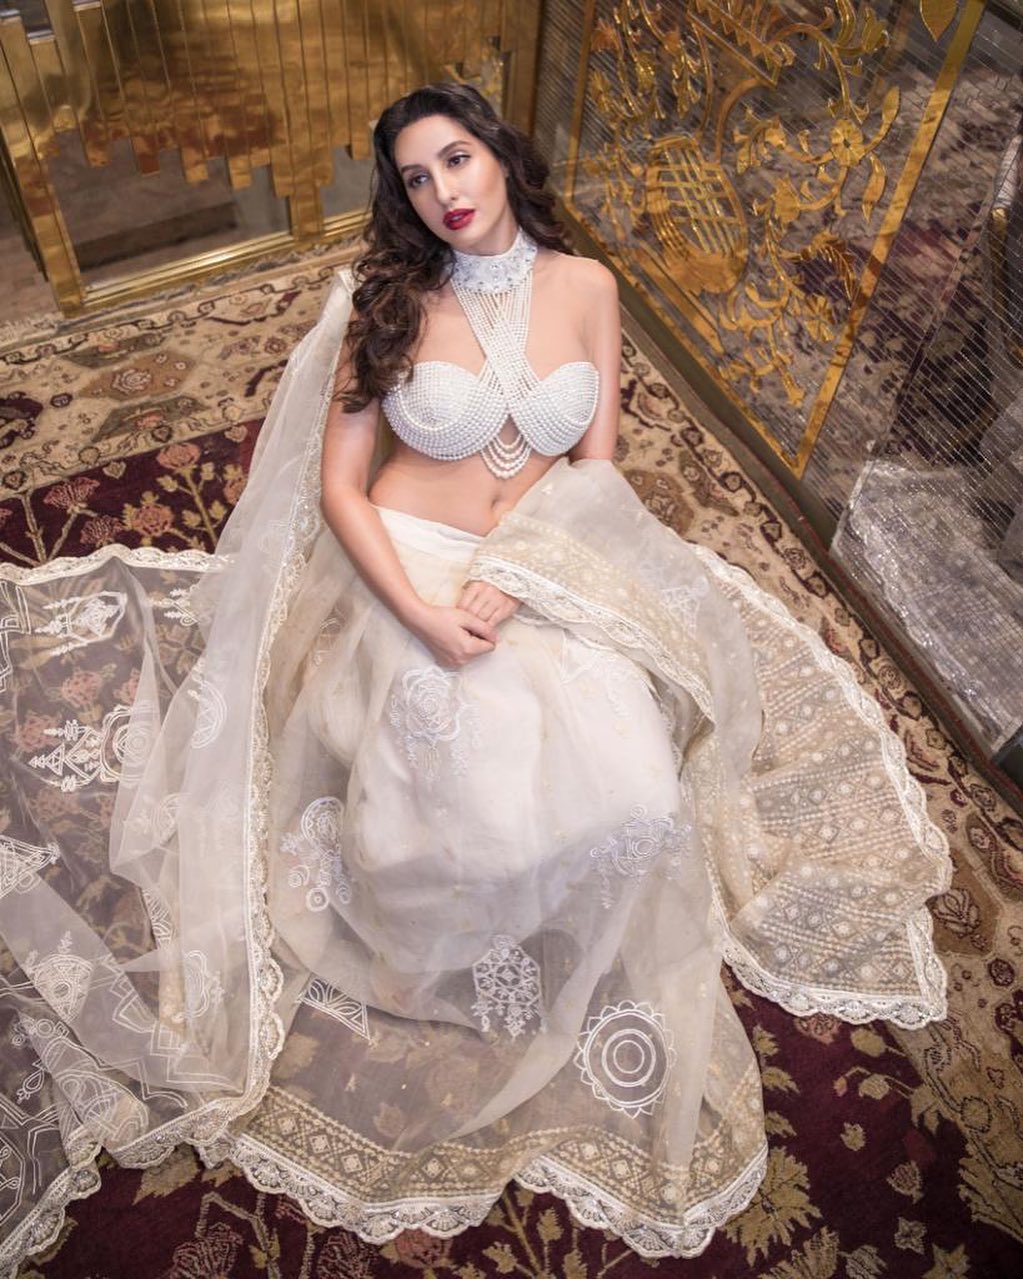 Nora Fatehi gives queen vibes in the white lehenga with the pearl blouse.